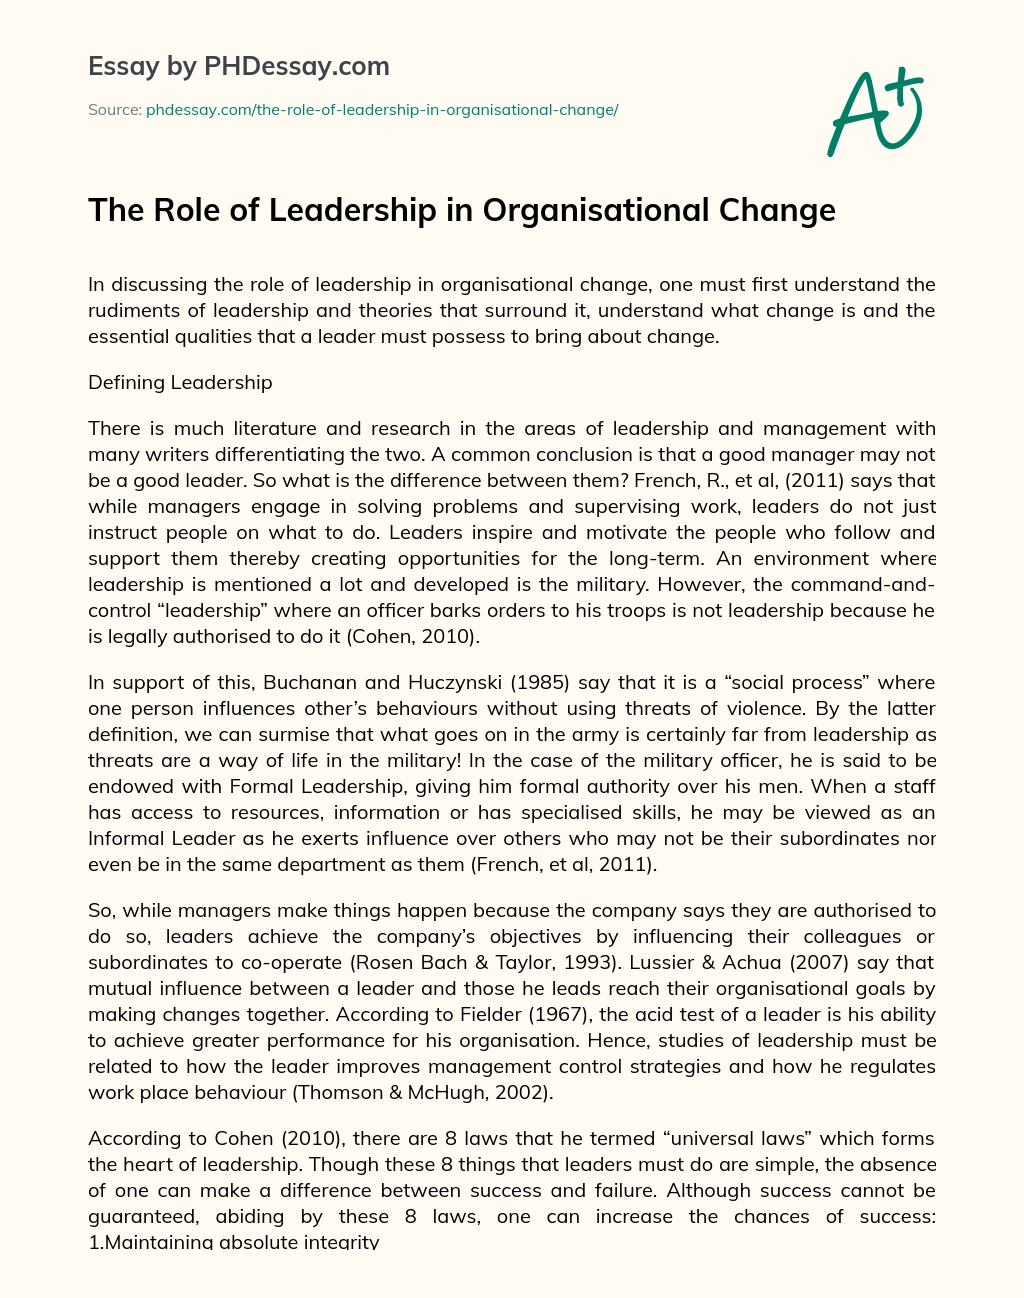 The Role of Leadership in Organisational Change essay